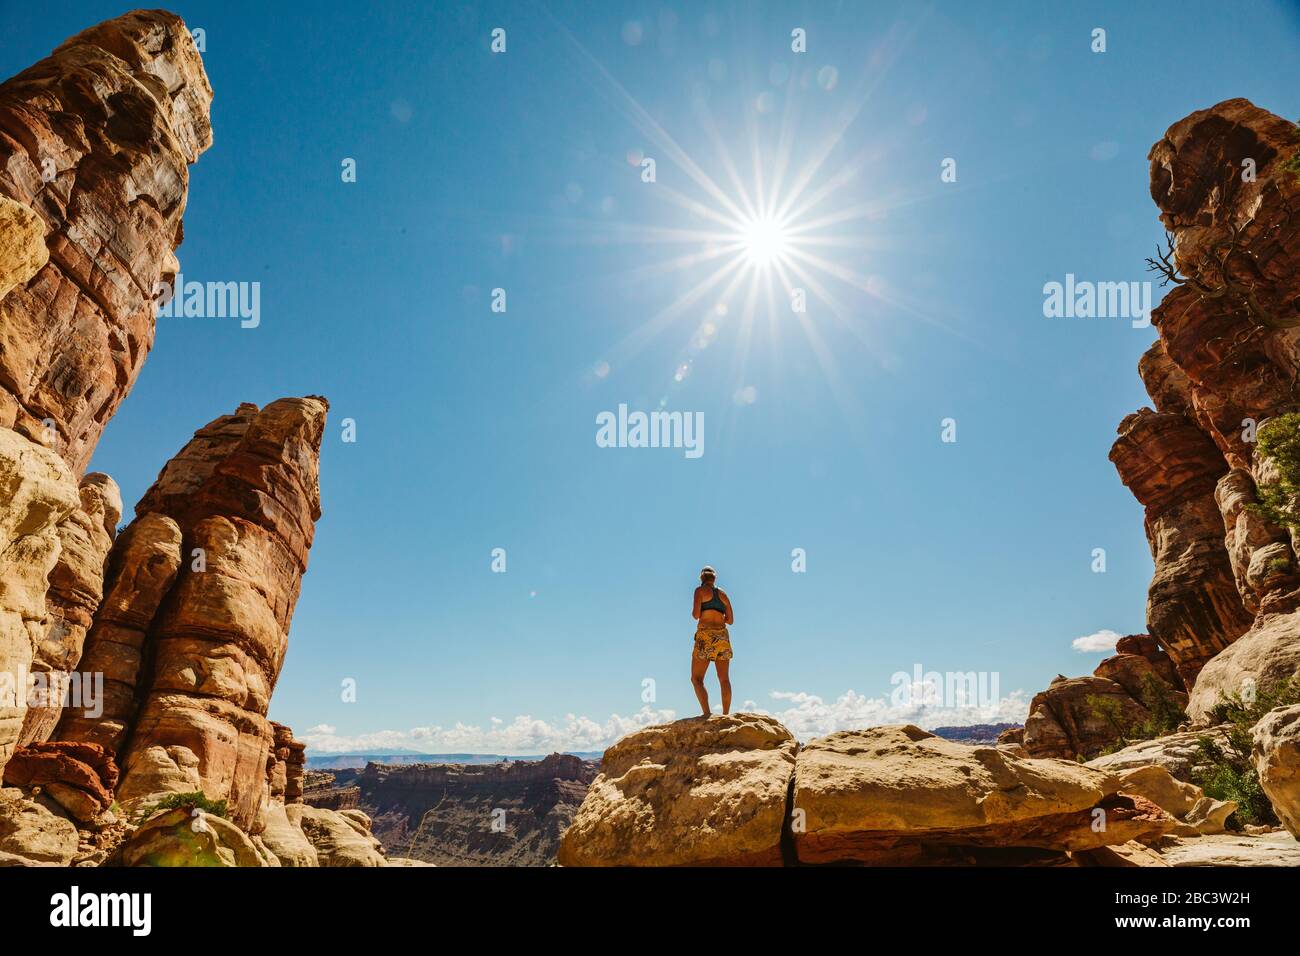 woman in sports bra and shorts stands on rocks in desert under sun Stock Photo